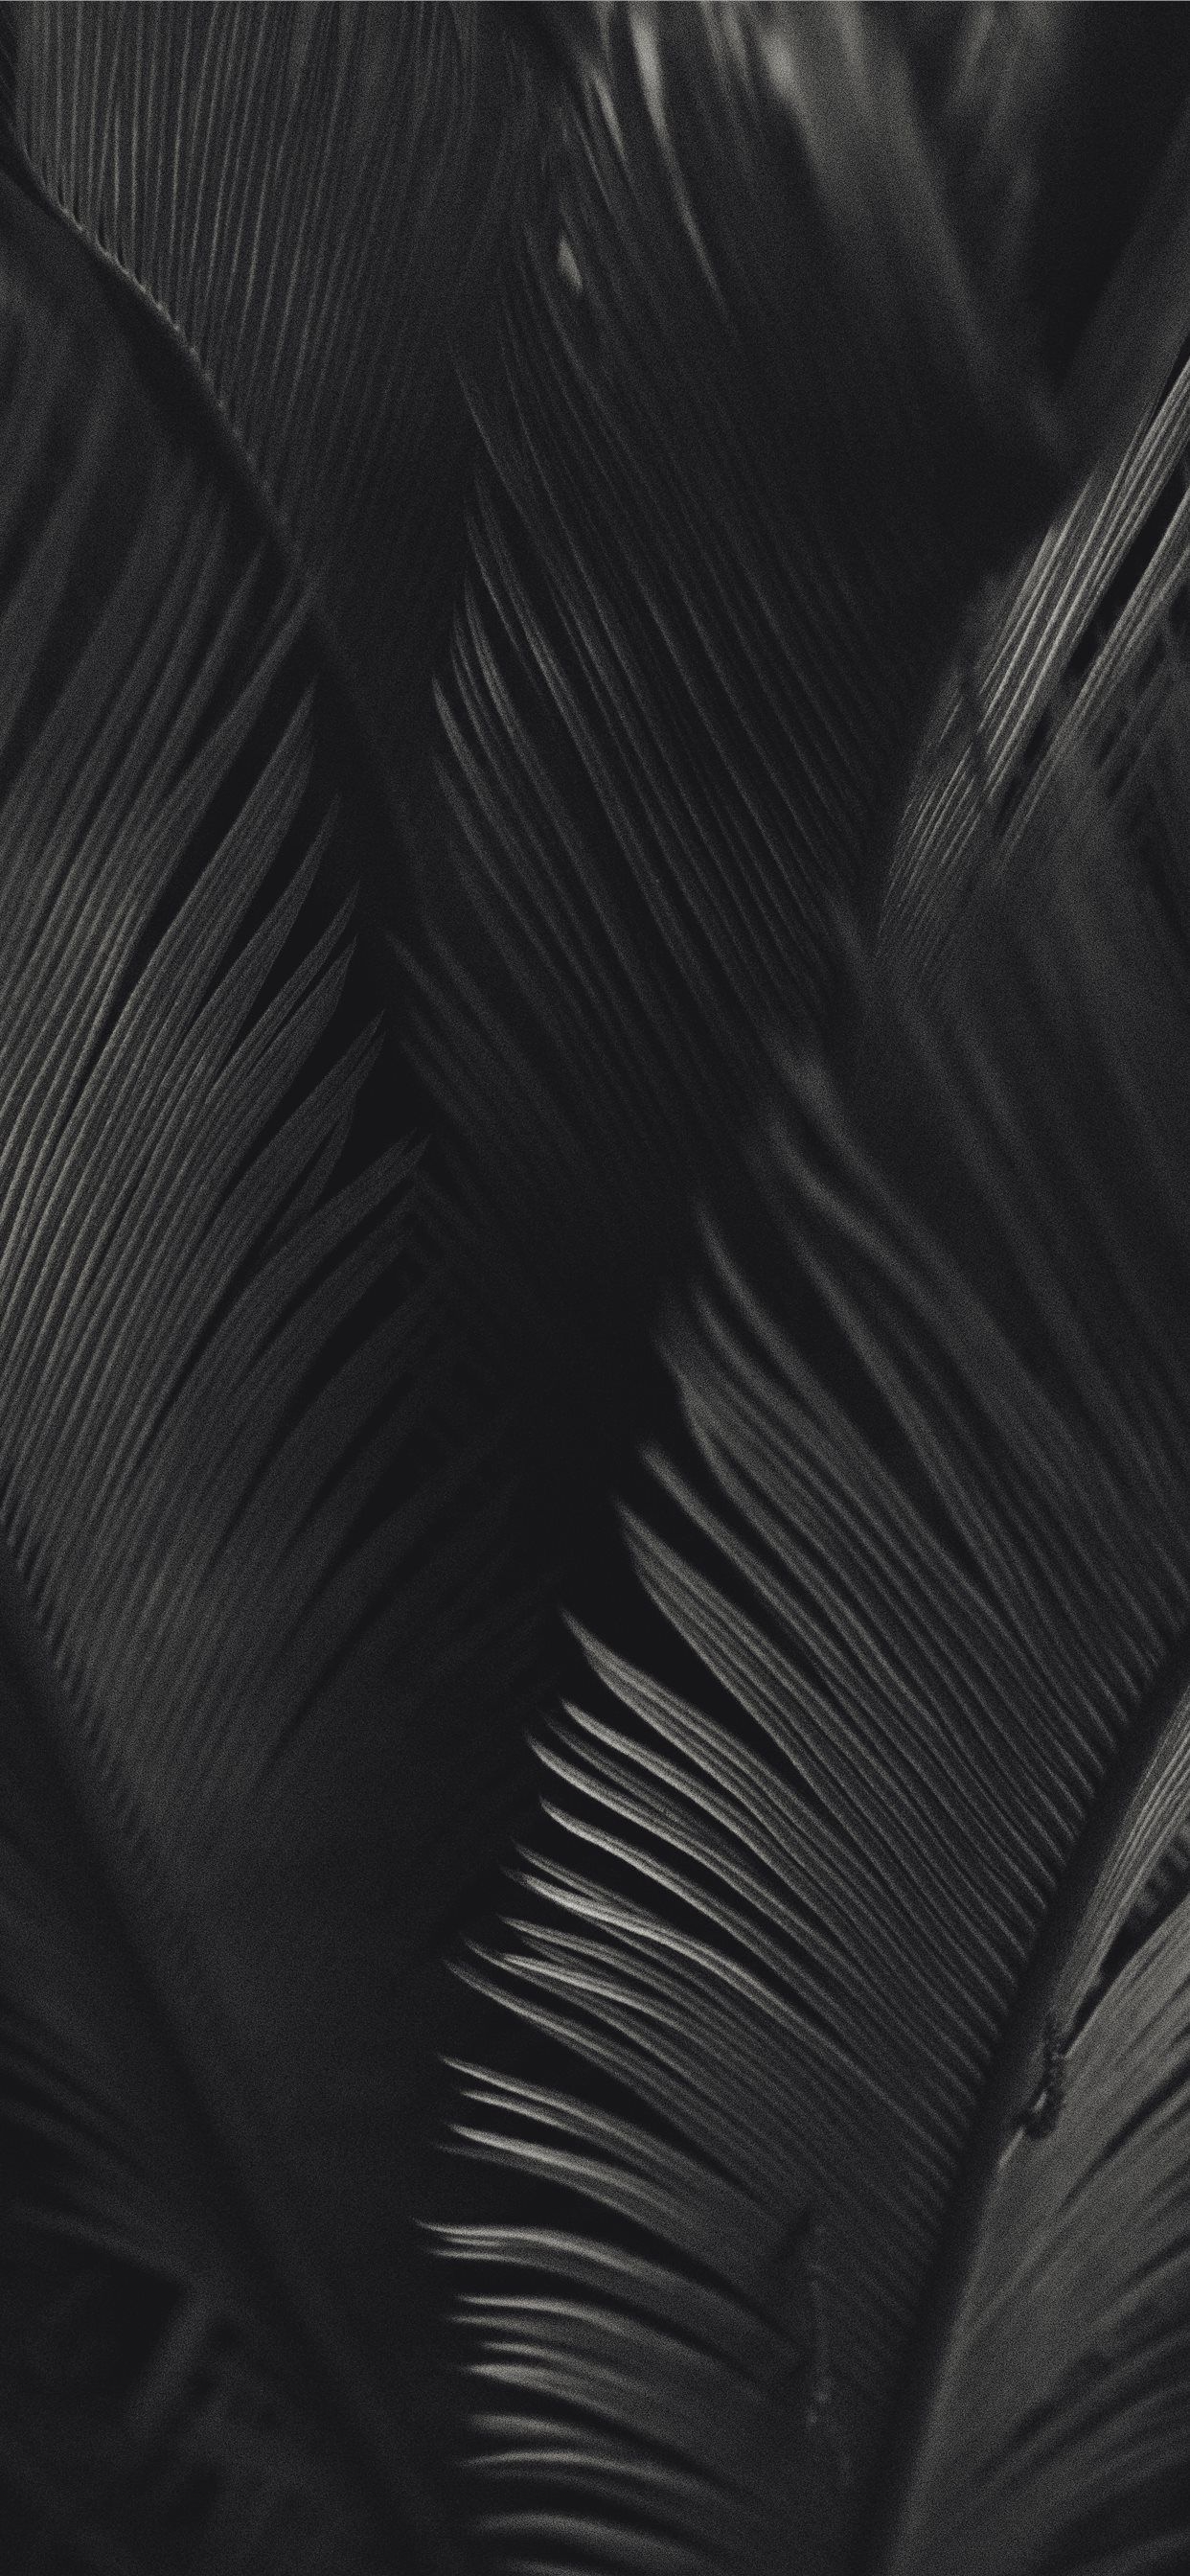 palm tree iPhone X Wallpaper Free Download